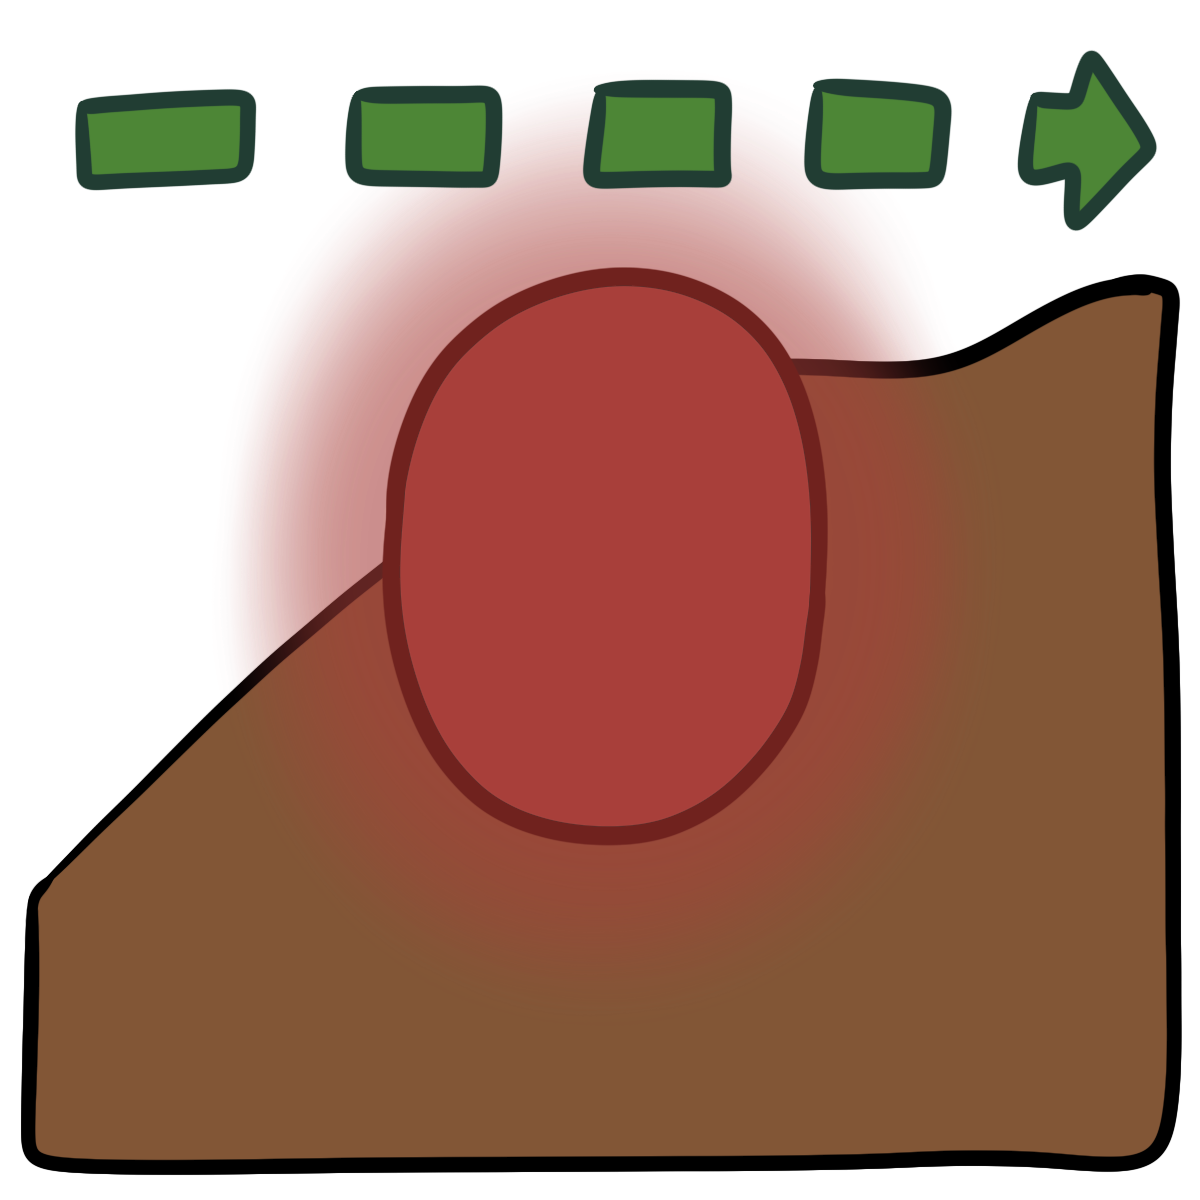 A dashed line green arrow pointing right. There is a glowing red oval in the center. Curved medium brown skin fills the bottom half of the background.